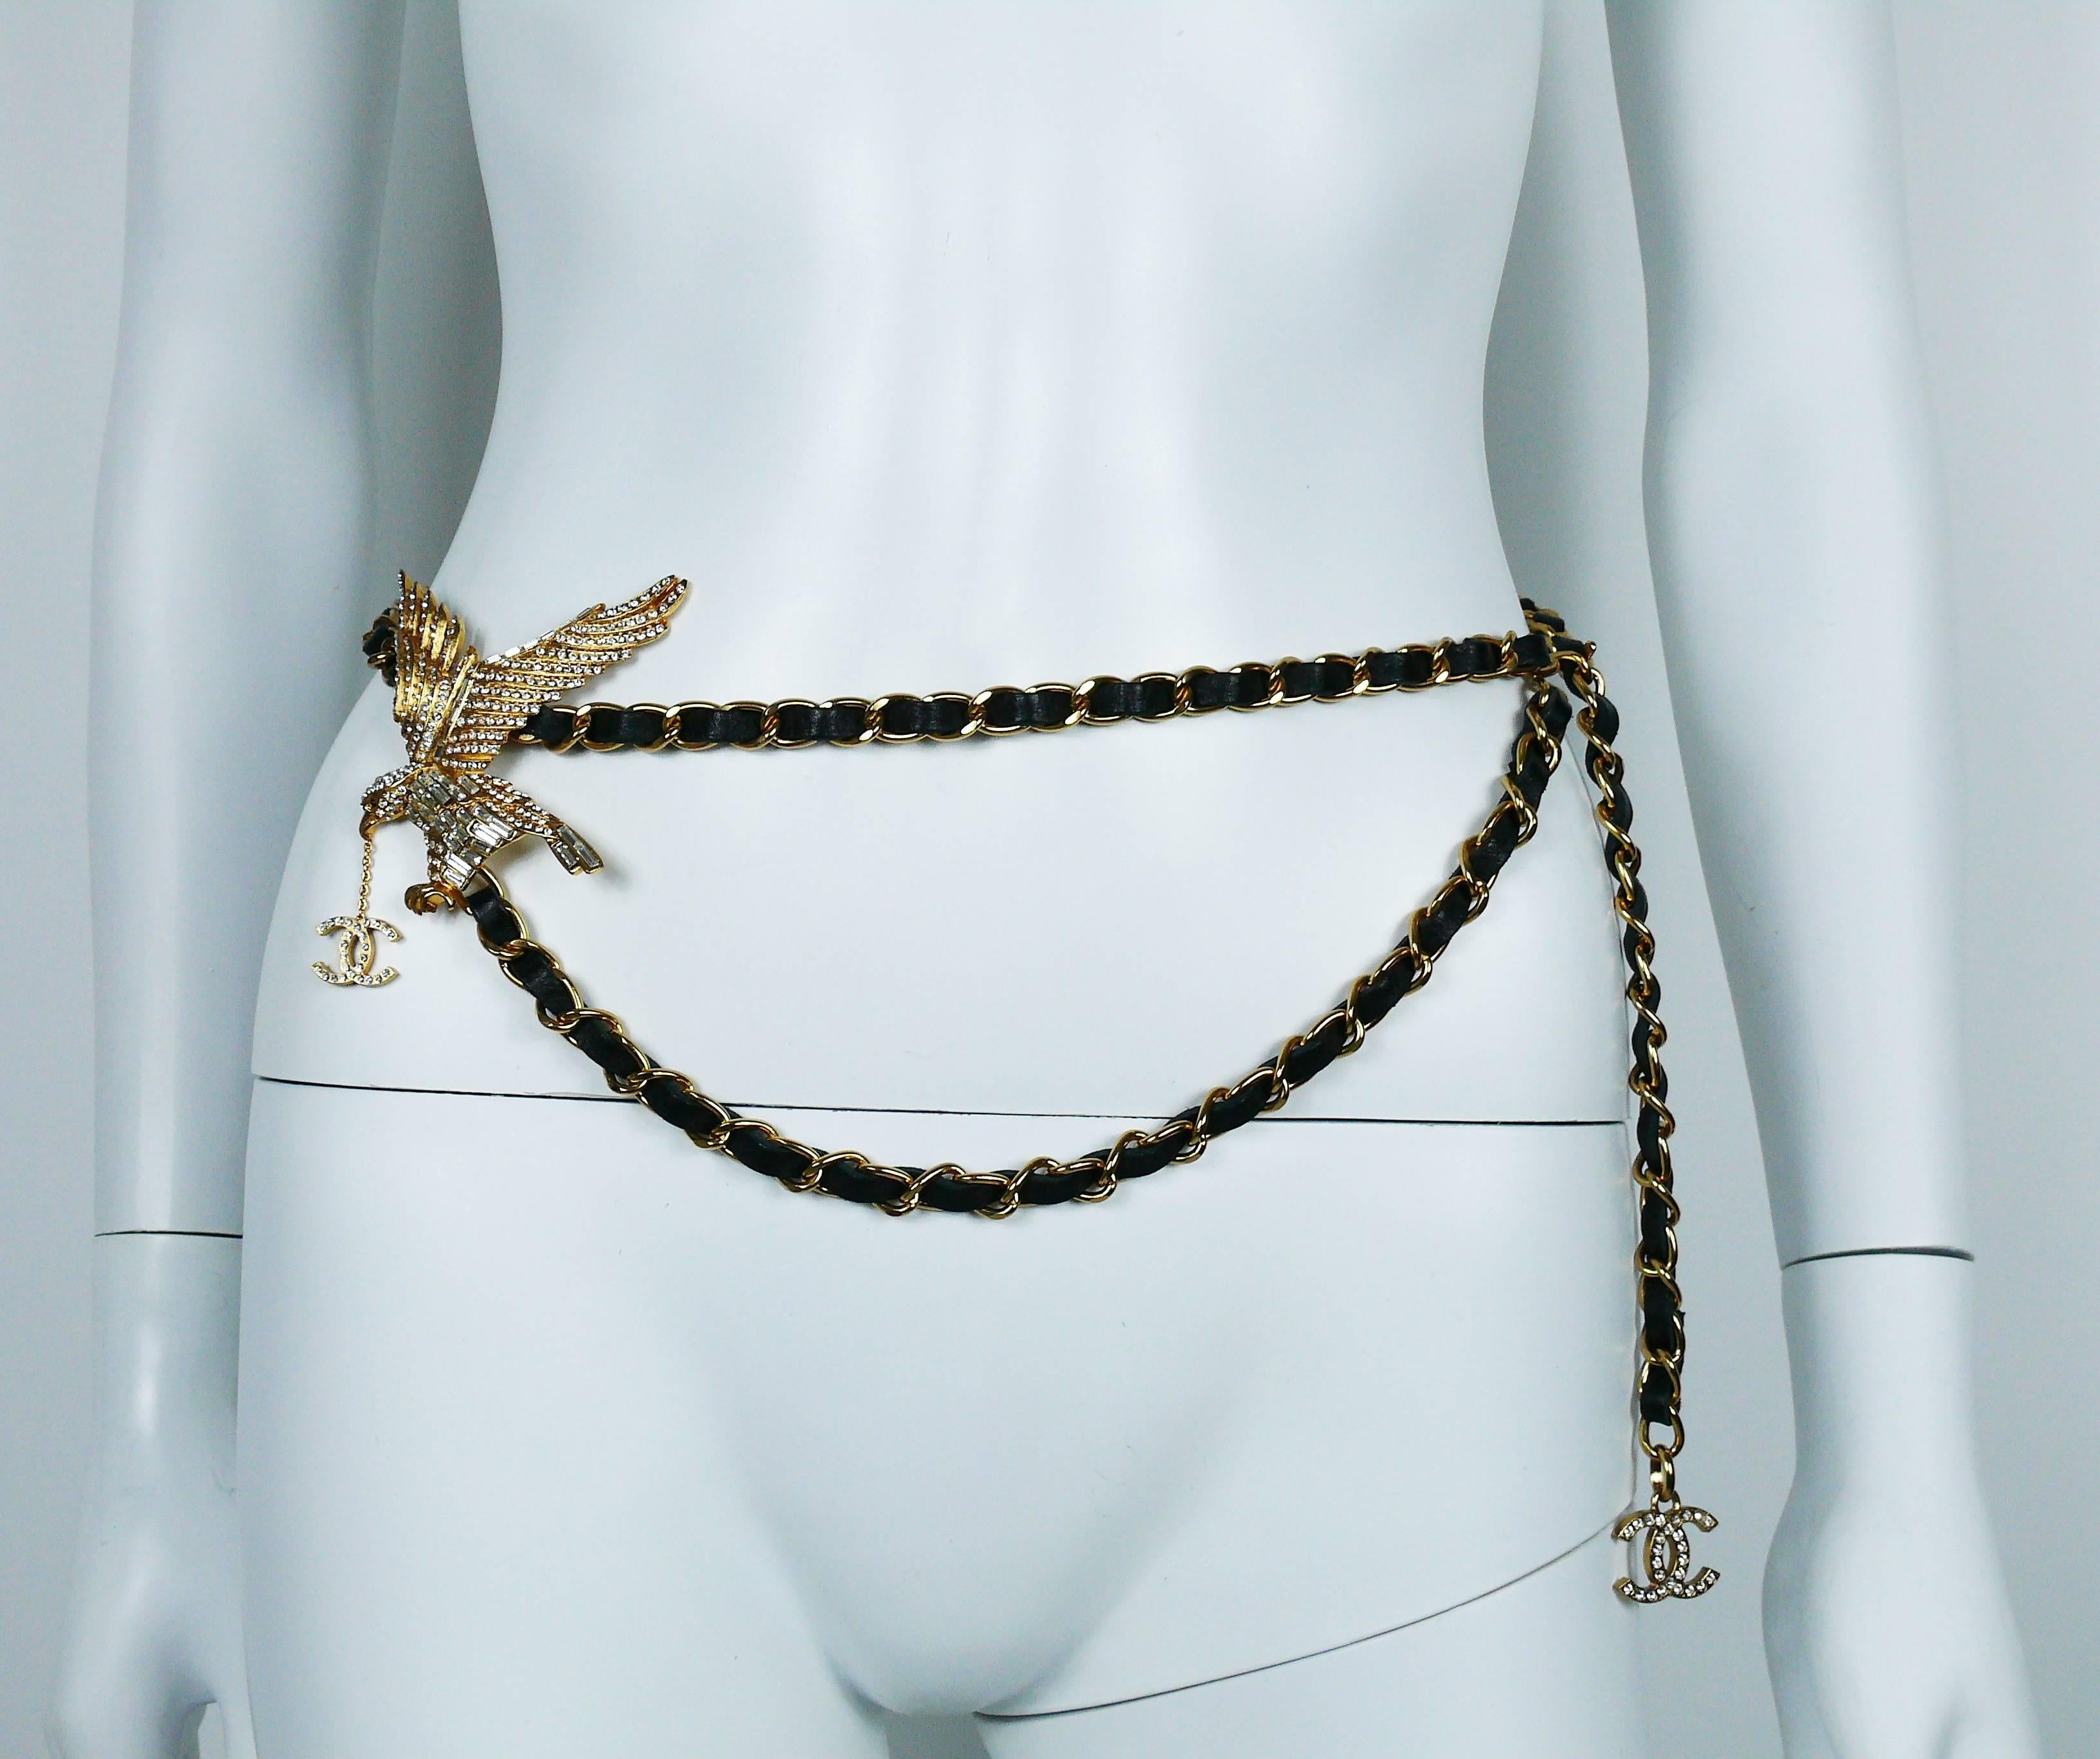 CHANEL rare gold tone chain belt with black interwoven leather featuring a large jewelled eagle.

Focal point of the CHANEL 2001 Spring runway show.

May be worn as a belt or necklace.

Hook closure.

Marked CHANEL 01 P Made in